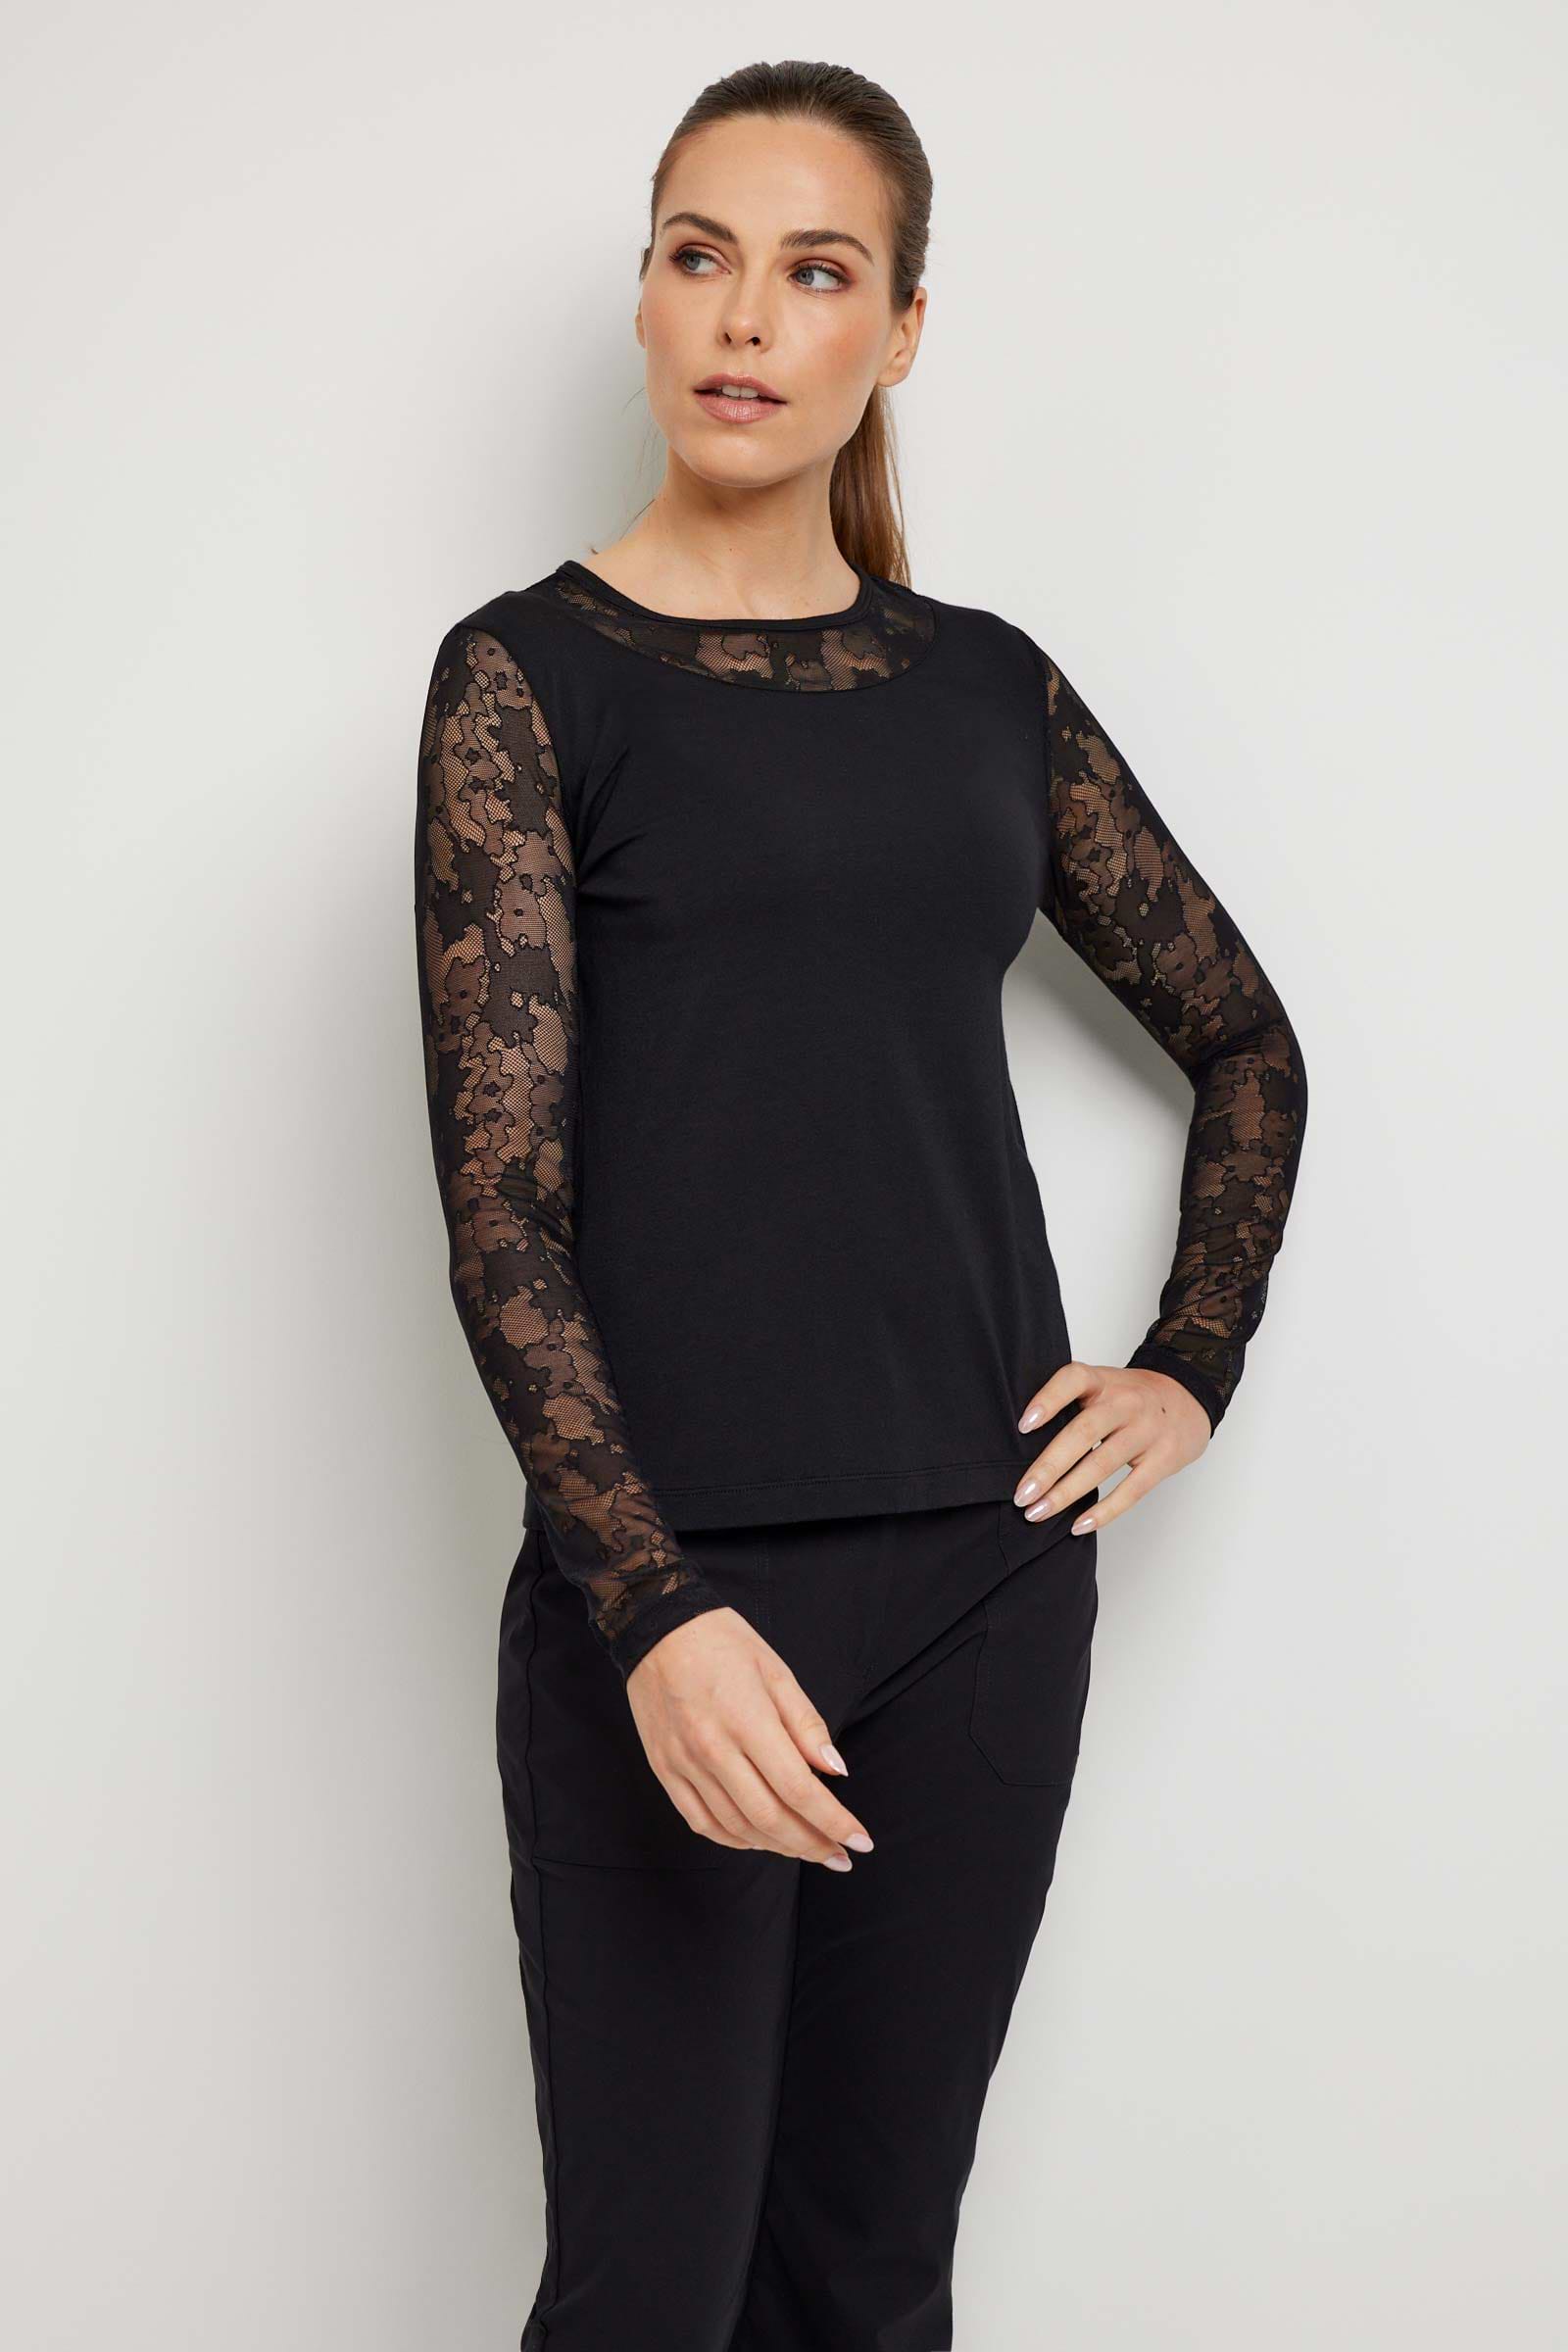 The Best Travel Top. Woman Showing the Front Profile of a Kim Camo Mesh Top in Black.